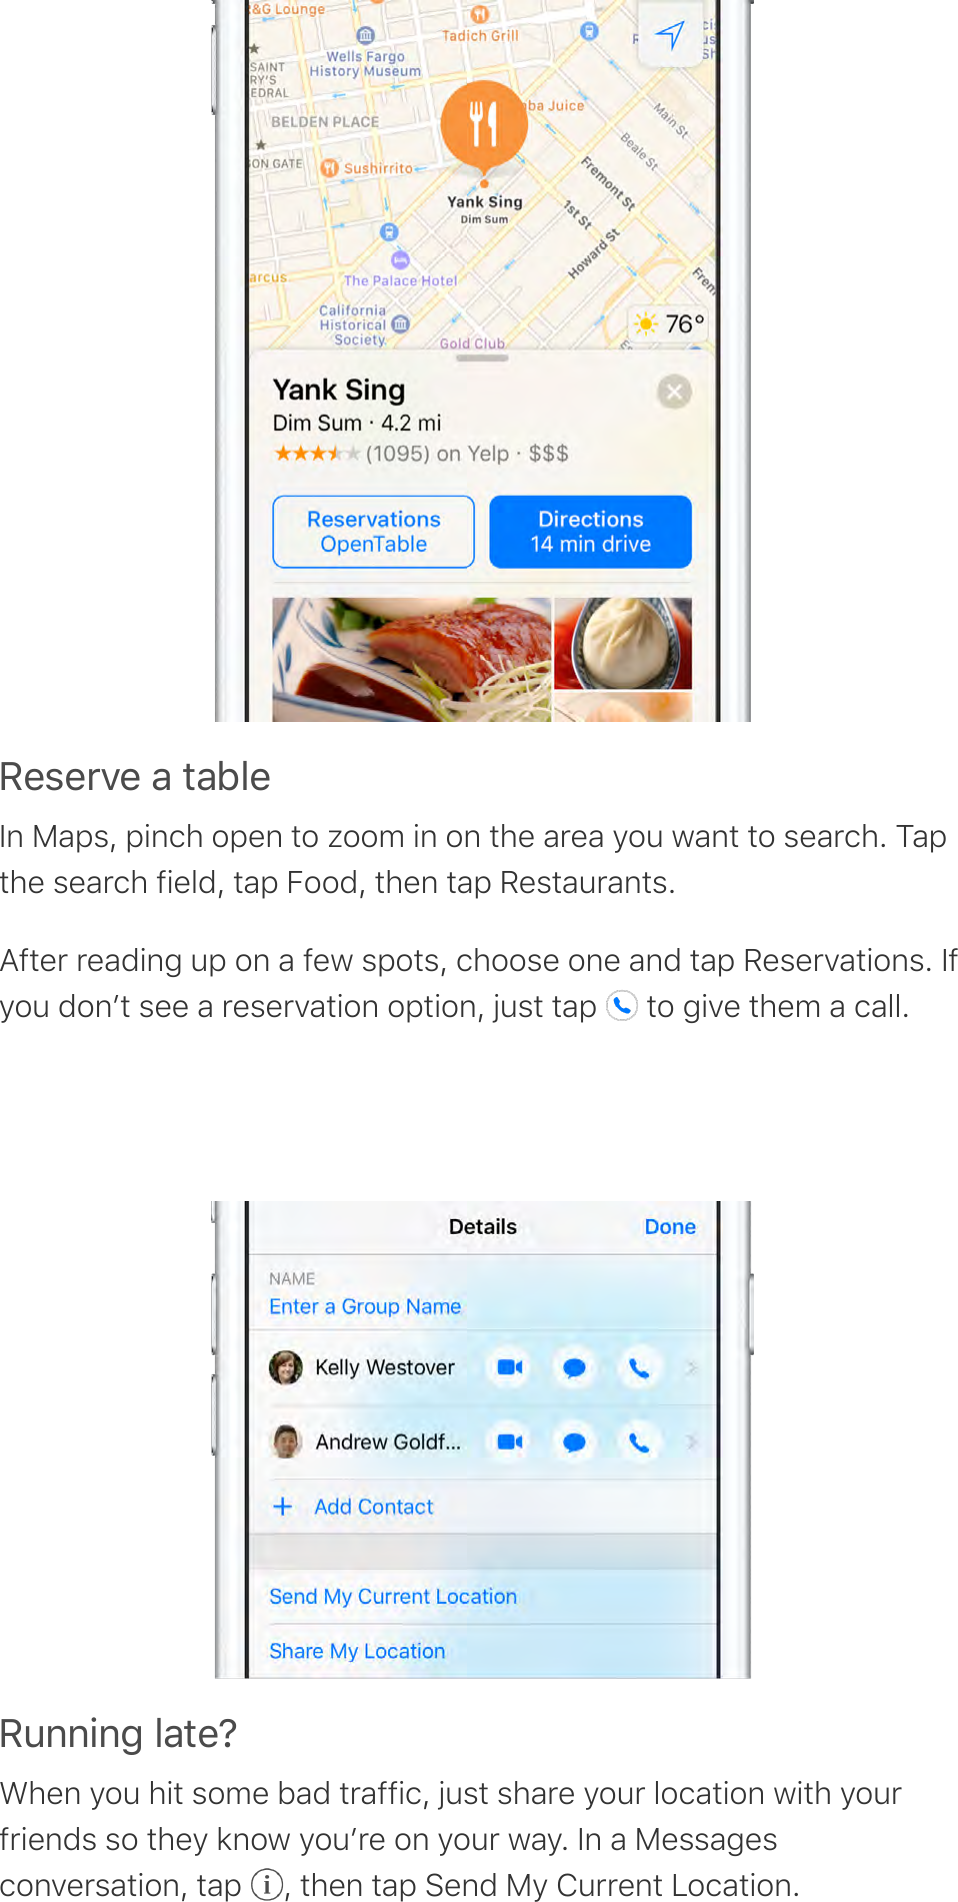 I&amp;,&amp;0A&amp;&apos;-&apos;*-F.&amp;In Maps, pinch open to zoom in on the area you want to search. Tapthe search field, tap Food, then tap Restaurants.After reading up on a few spots, choose one and tap Reservations. Ifyou donʼt see a reservation option, just tap   to give them a call.I6%%!%4&apos;.-*&amp;JWhen you hit some bad traffic, just share your location with yourfriends so they know youʼre on your way. In a Messagesconversation, tap  , then tap Send My Current Location.